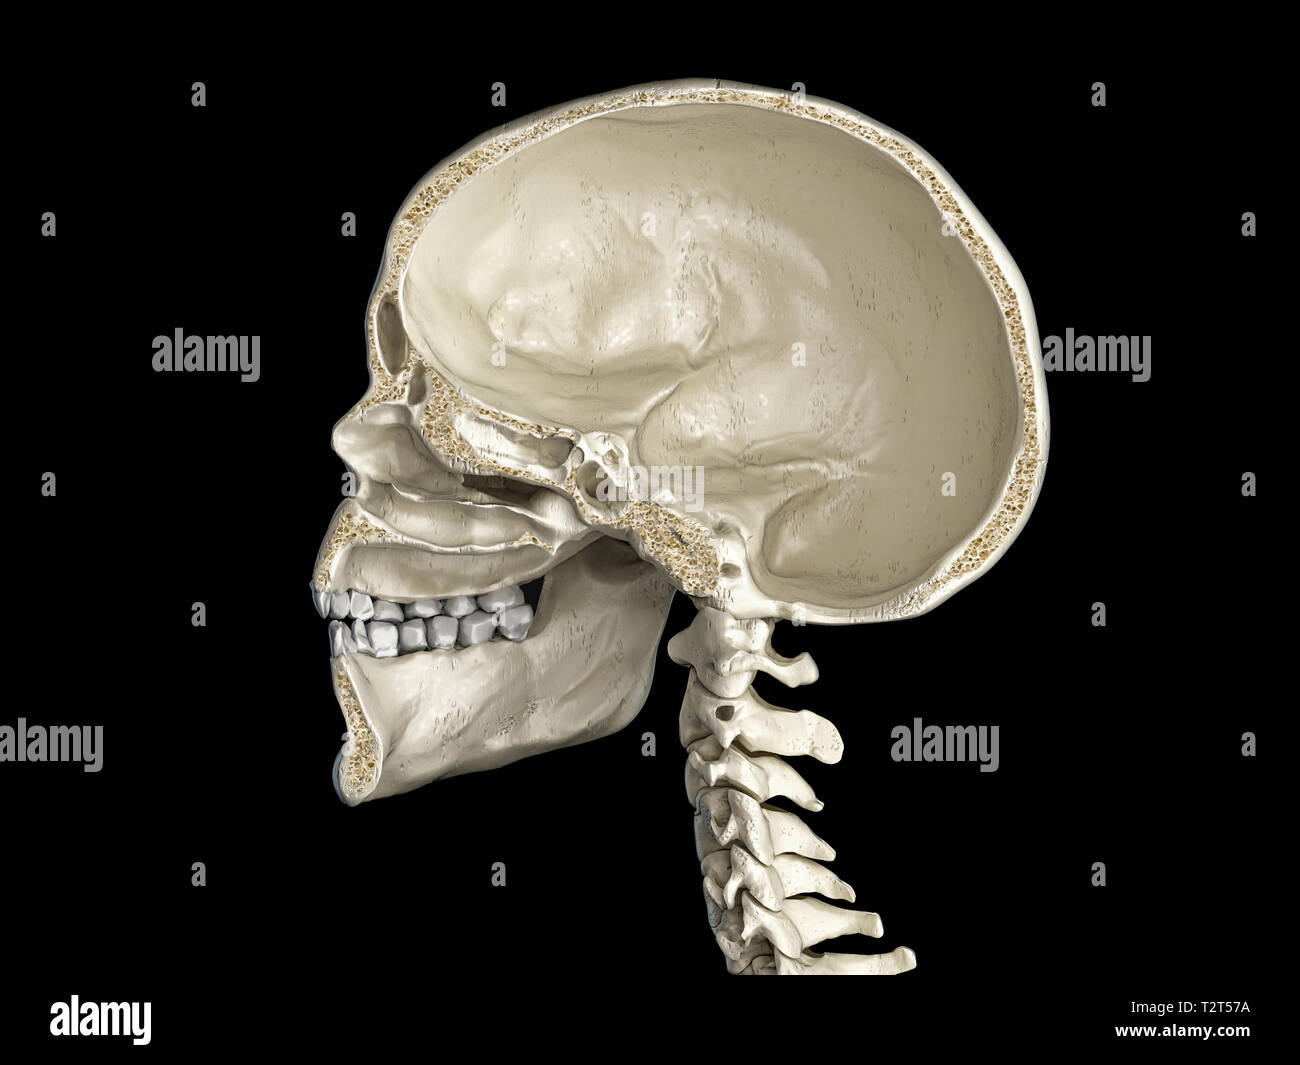 Human skull mid sagittal cross-section, side view. On black background. Stock Photo